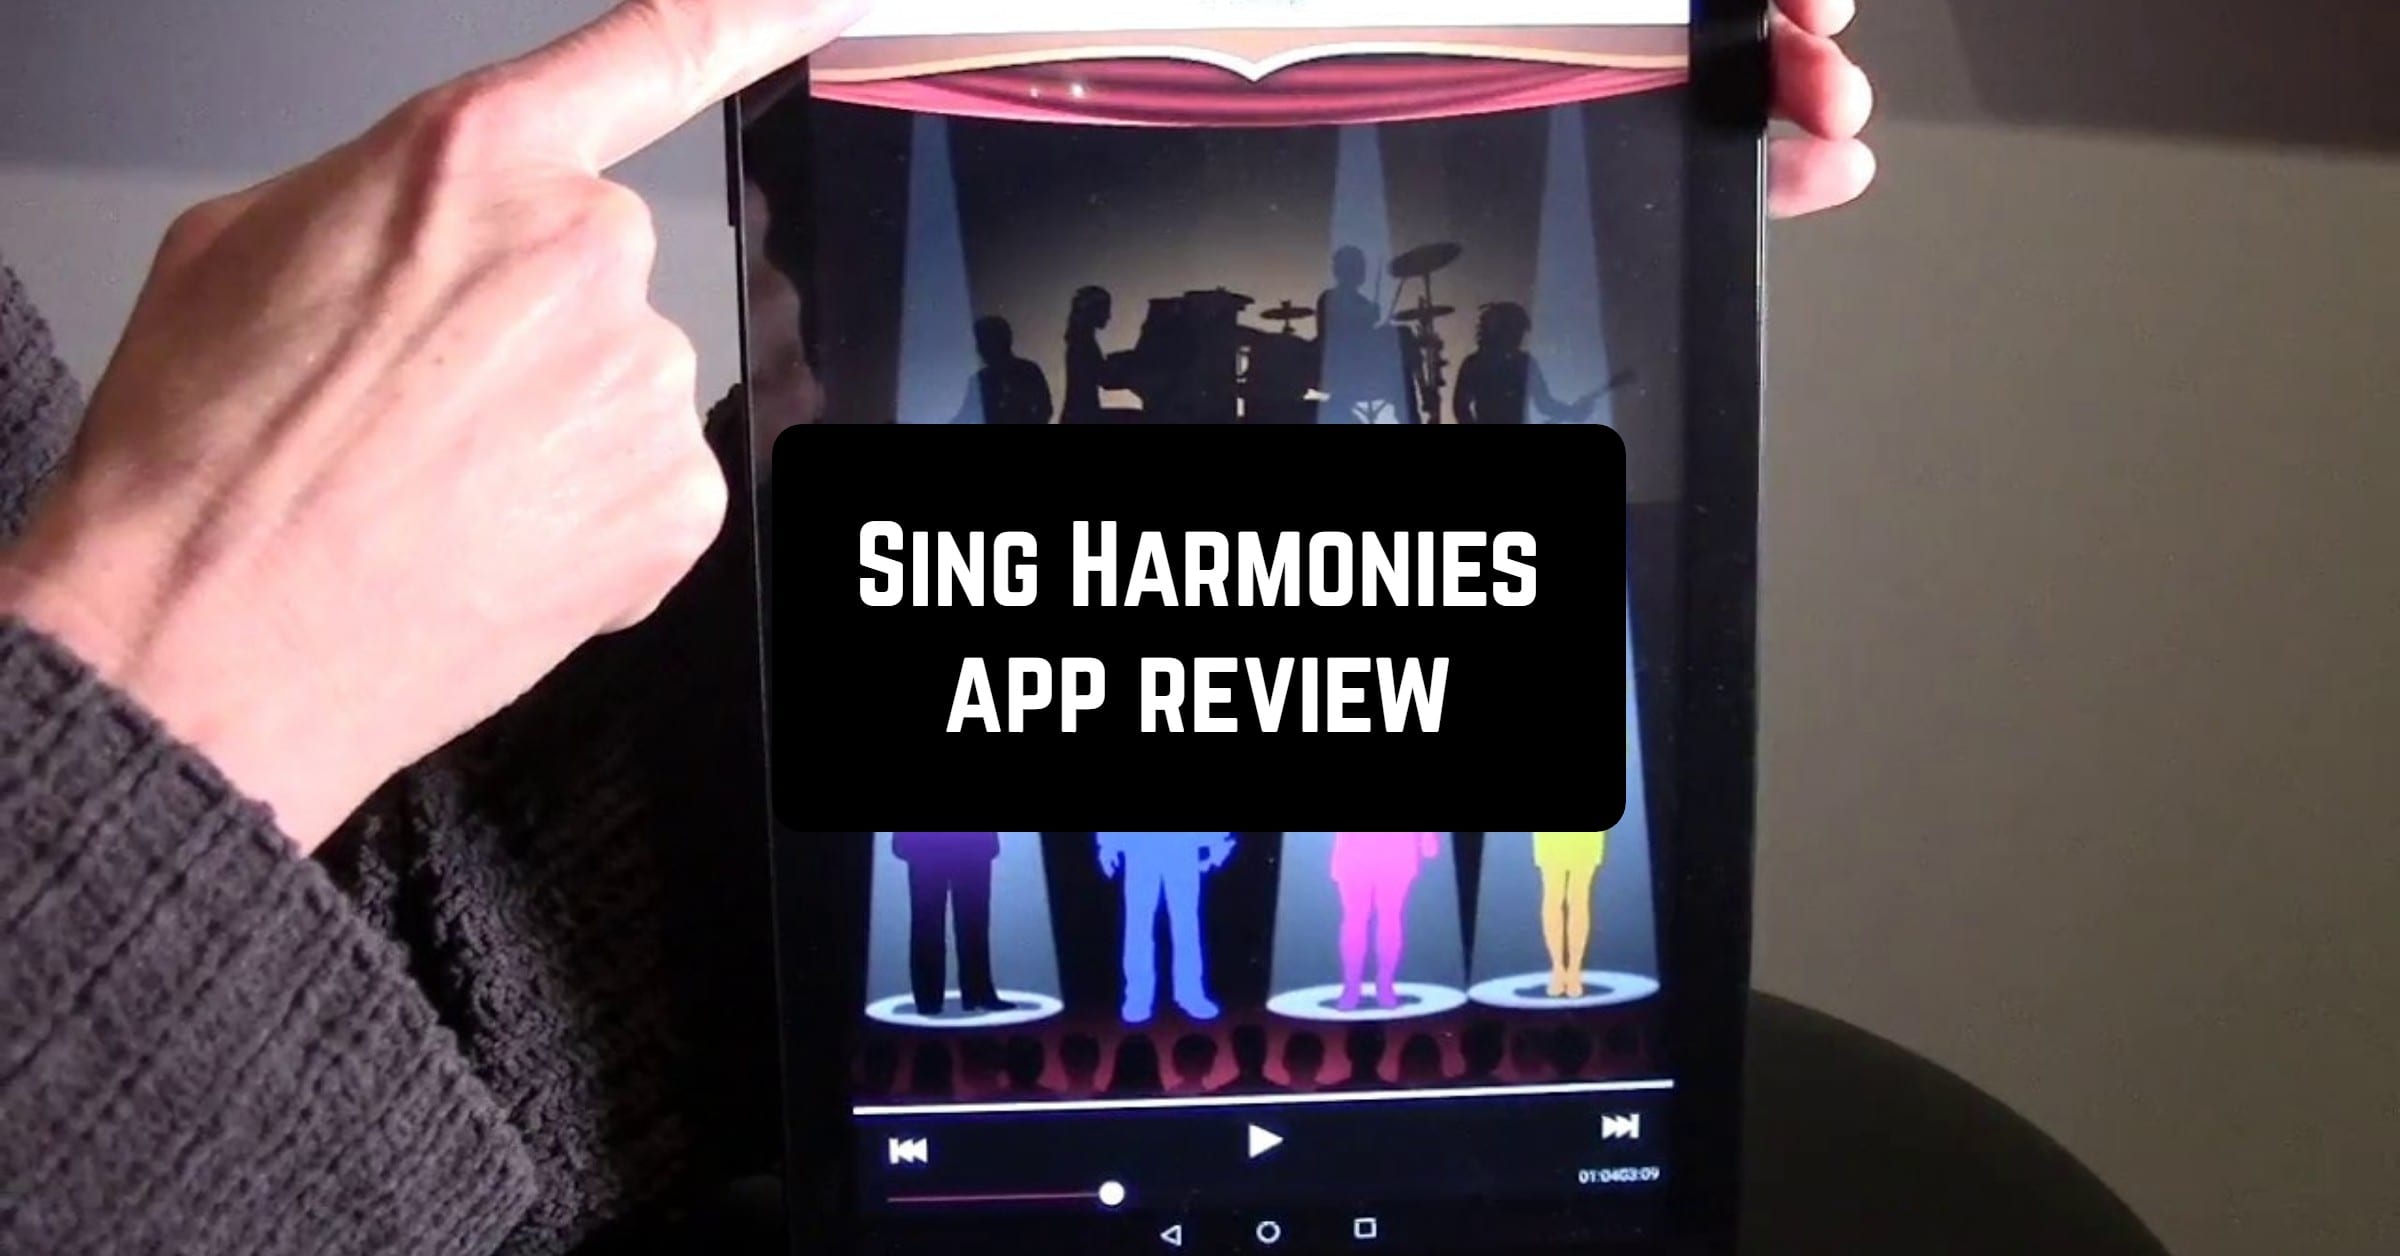 Sing Harmonies App Review Android apps for me. Download